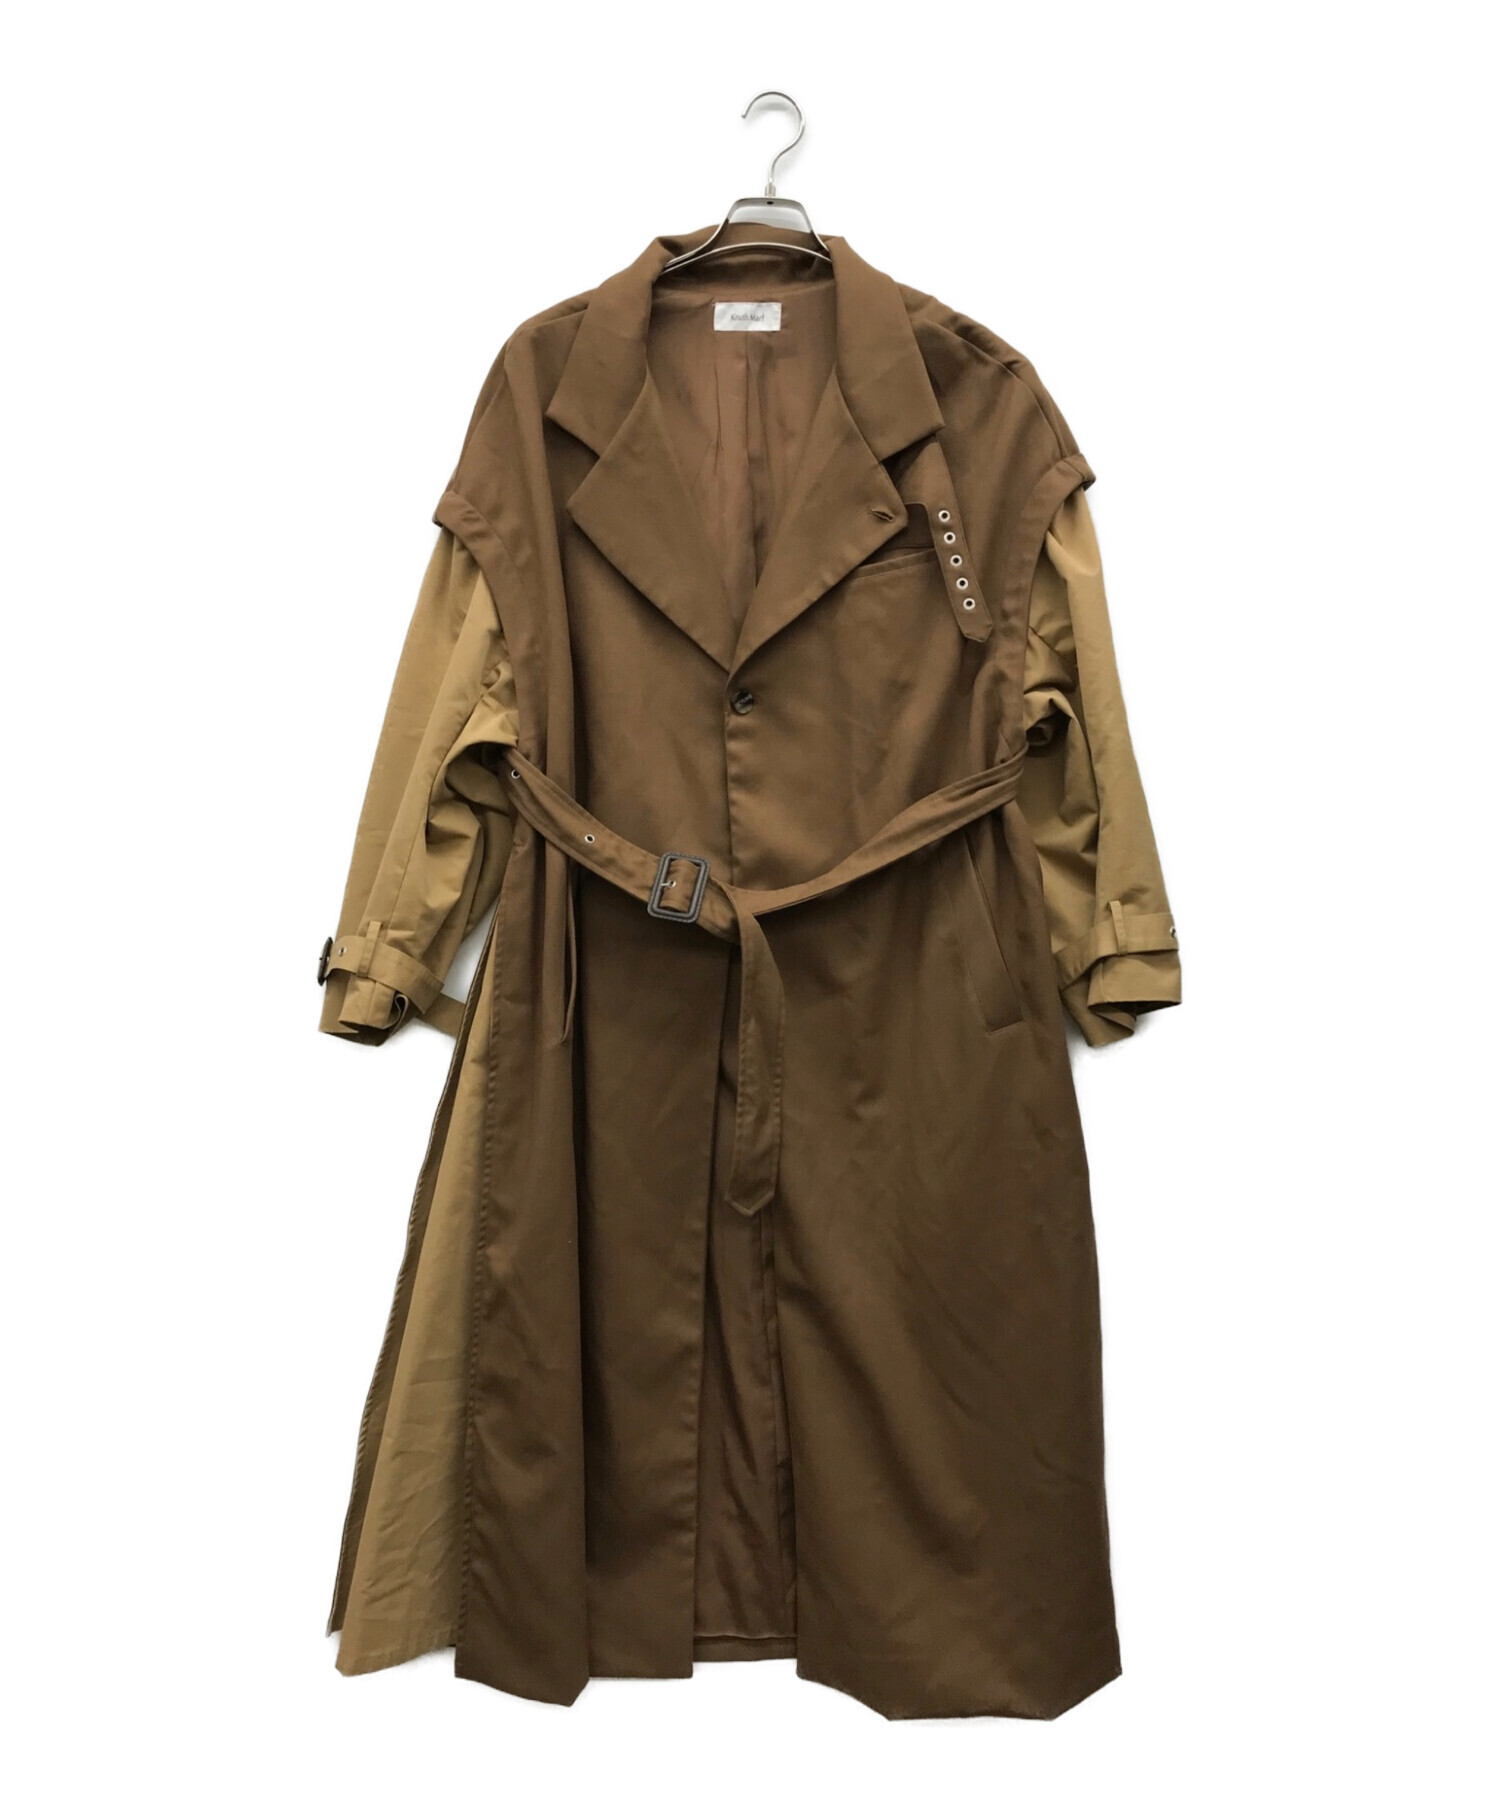 KnuthmarfKnuth Marf 3way unique trench coat